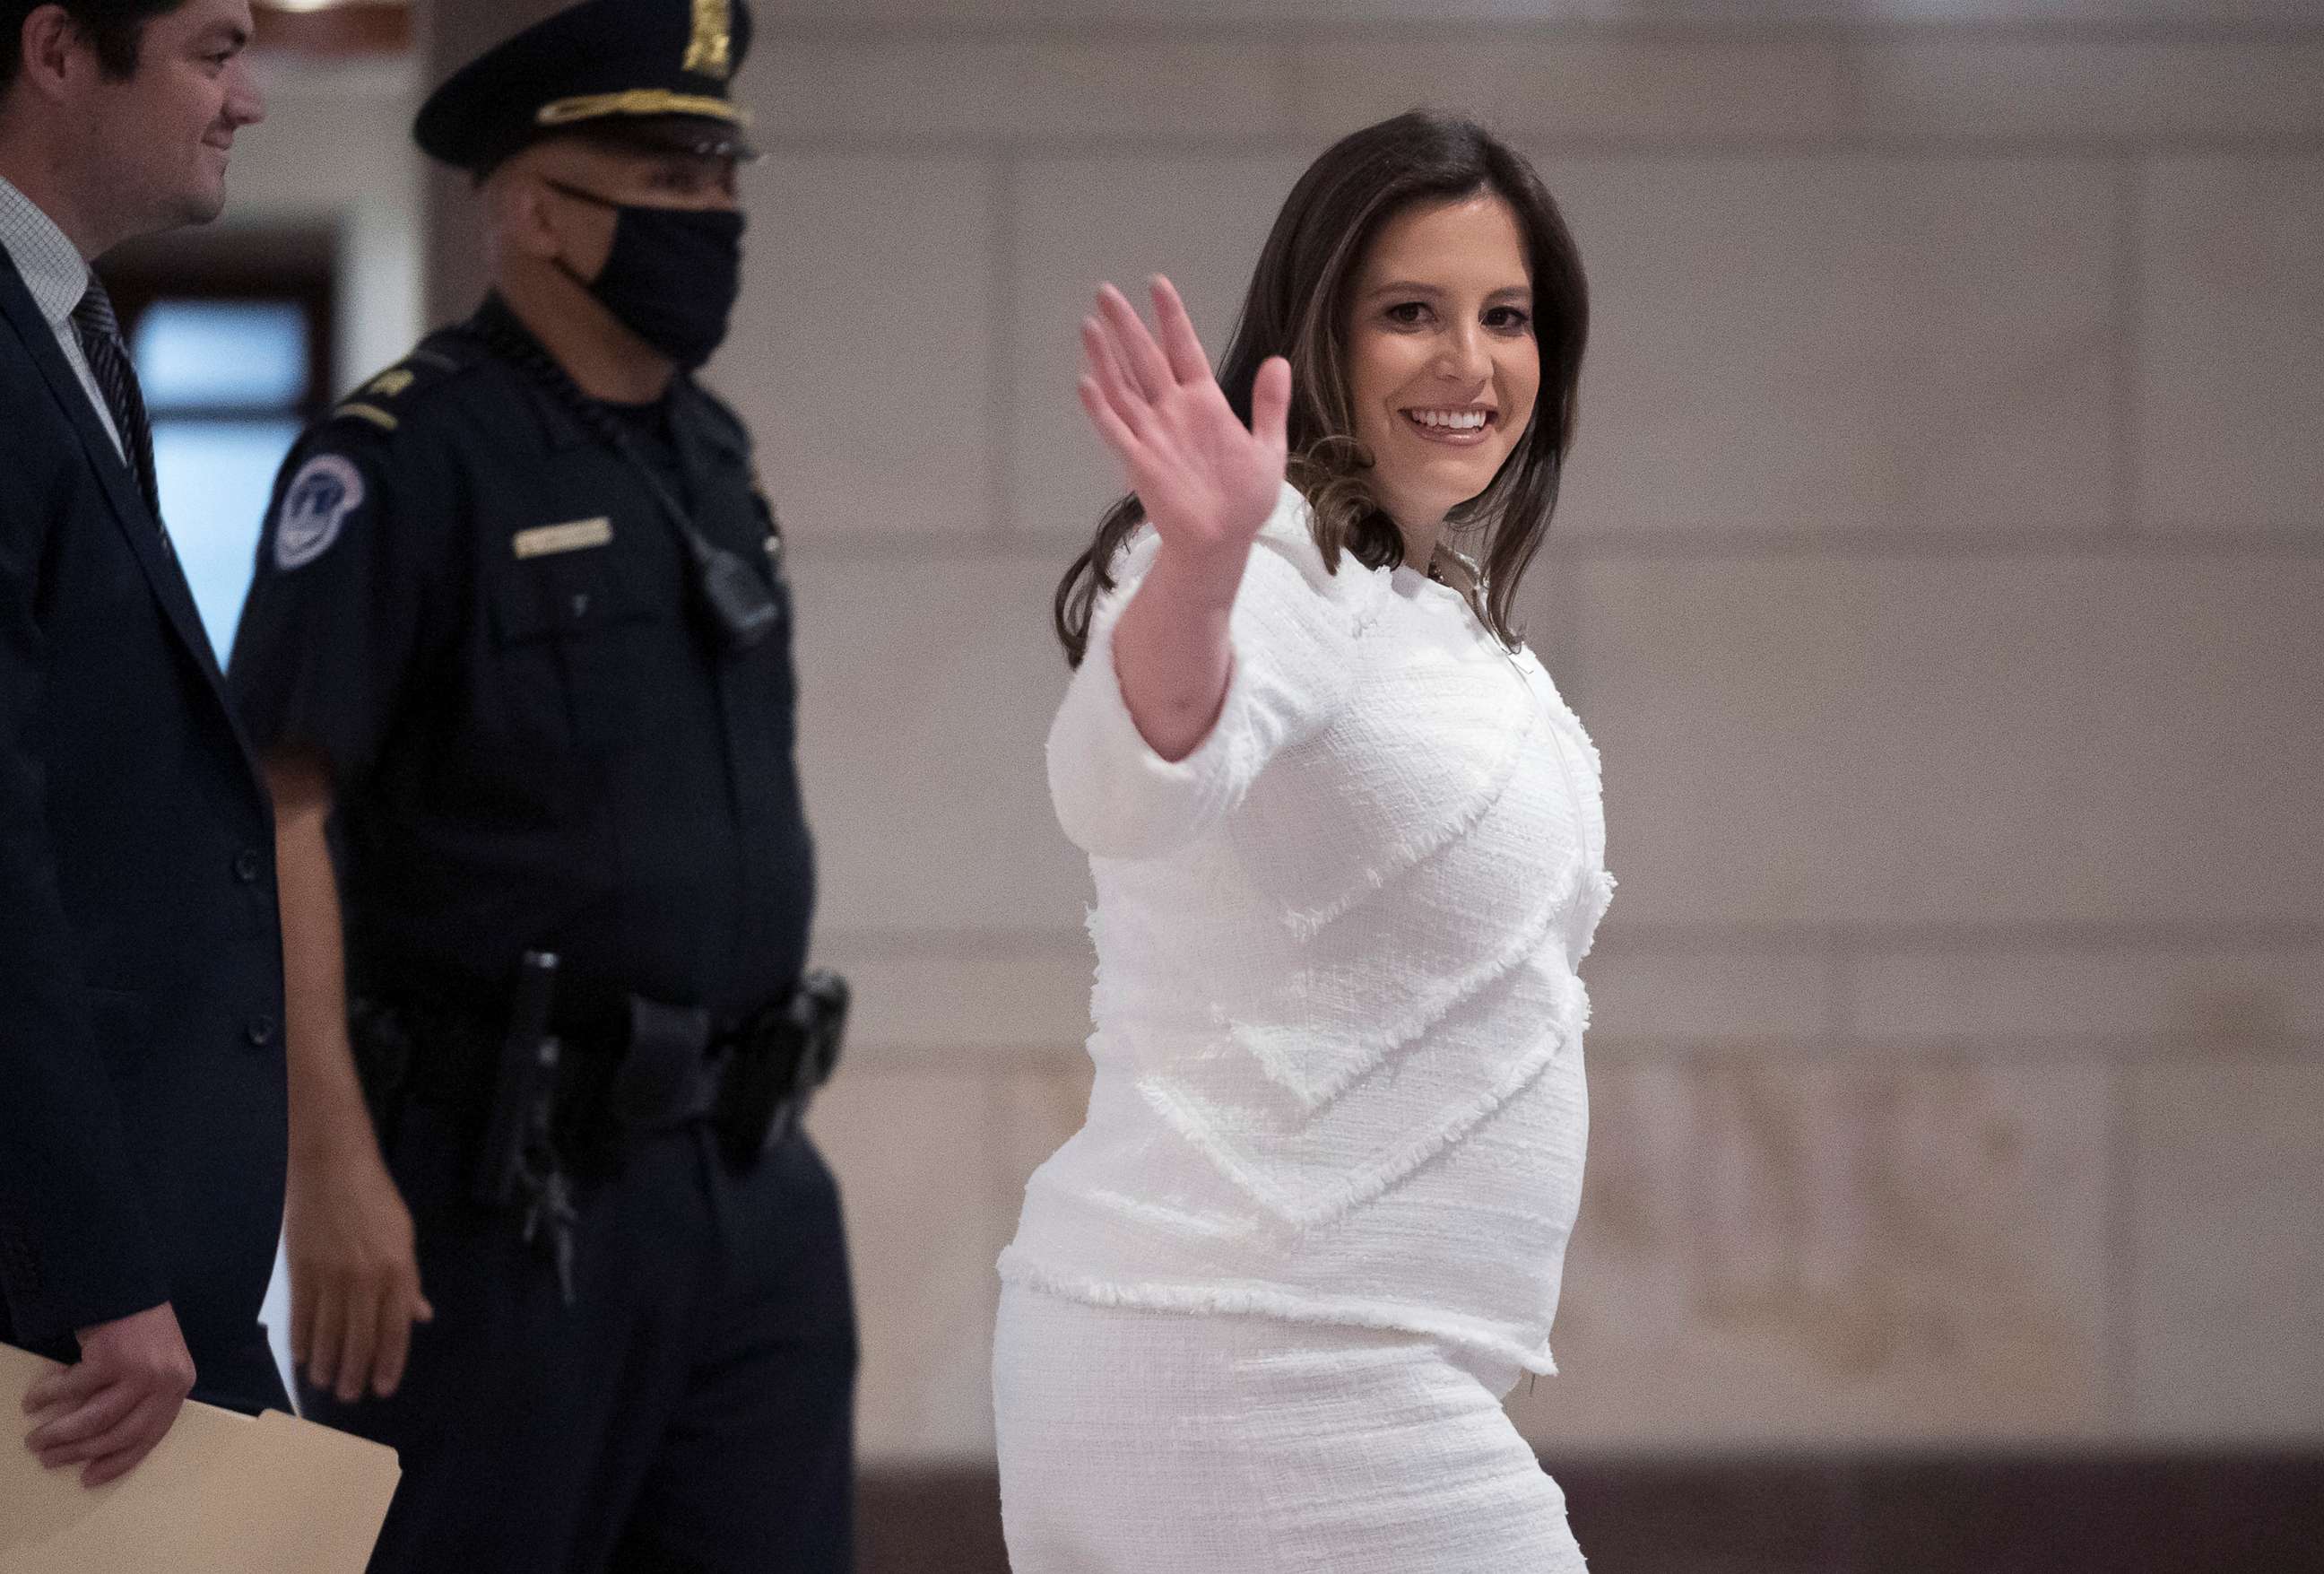 PHOTO: Rep. Elise Stefanik arrives as House GOP members hold an election for a new chair of the House Republican Conference to replace Rep. Liz Cheney, at the Capitol in Washington, D.C., May 14, 2021.